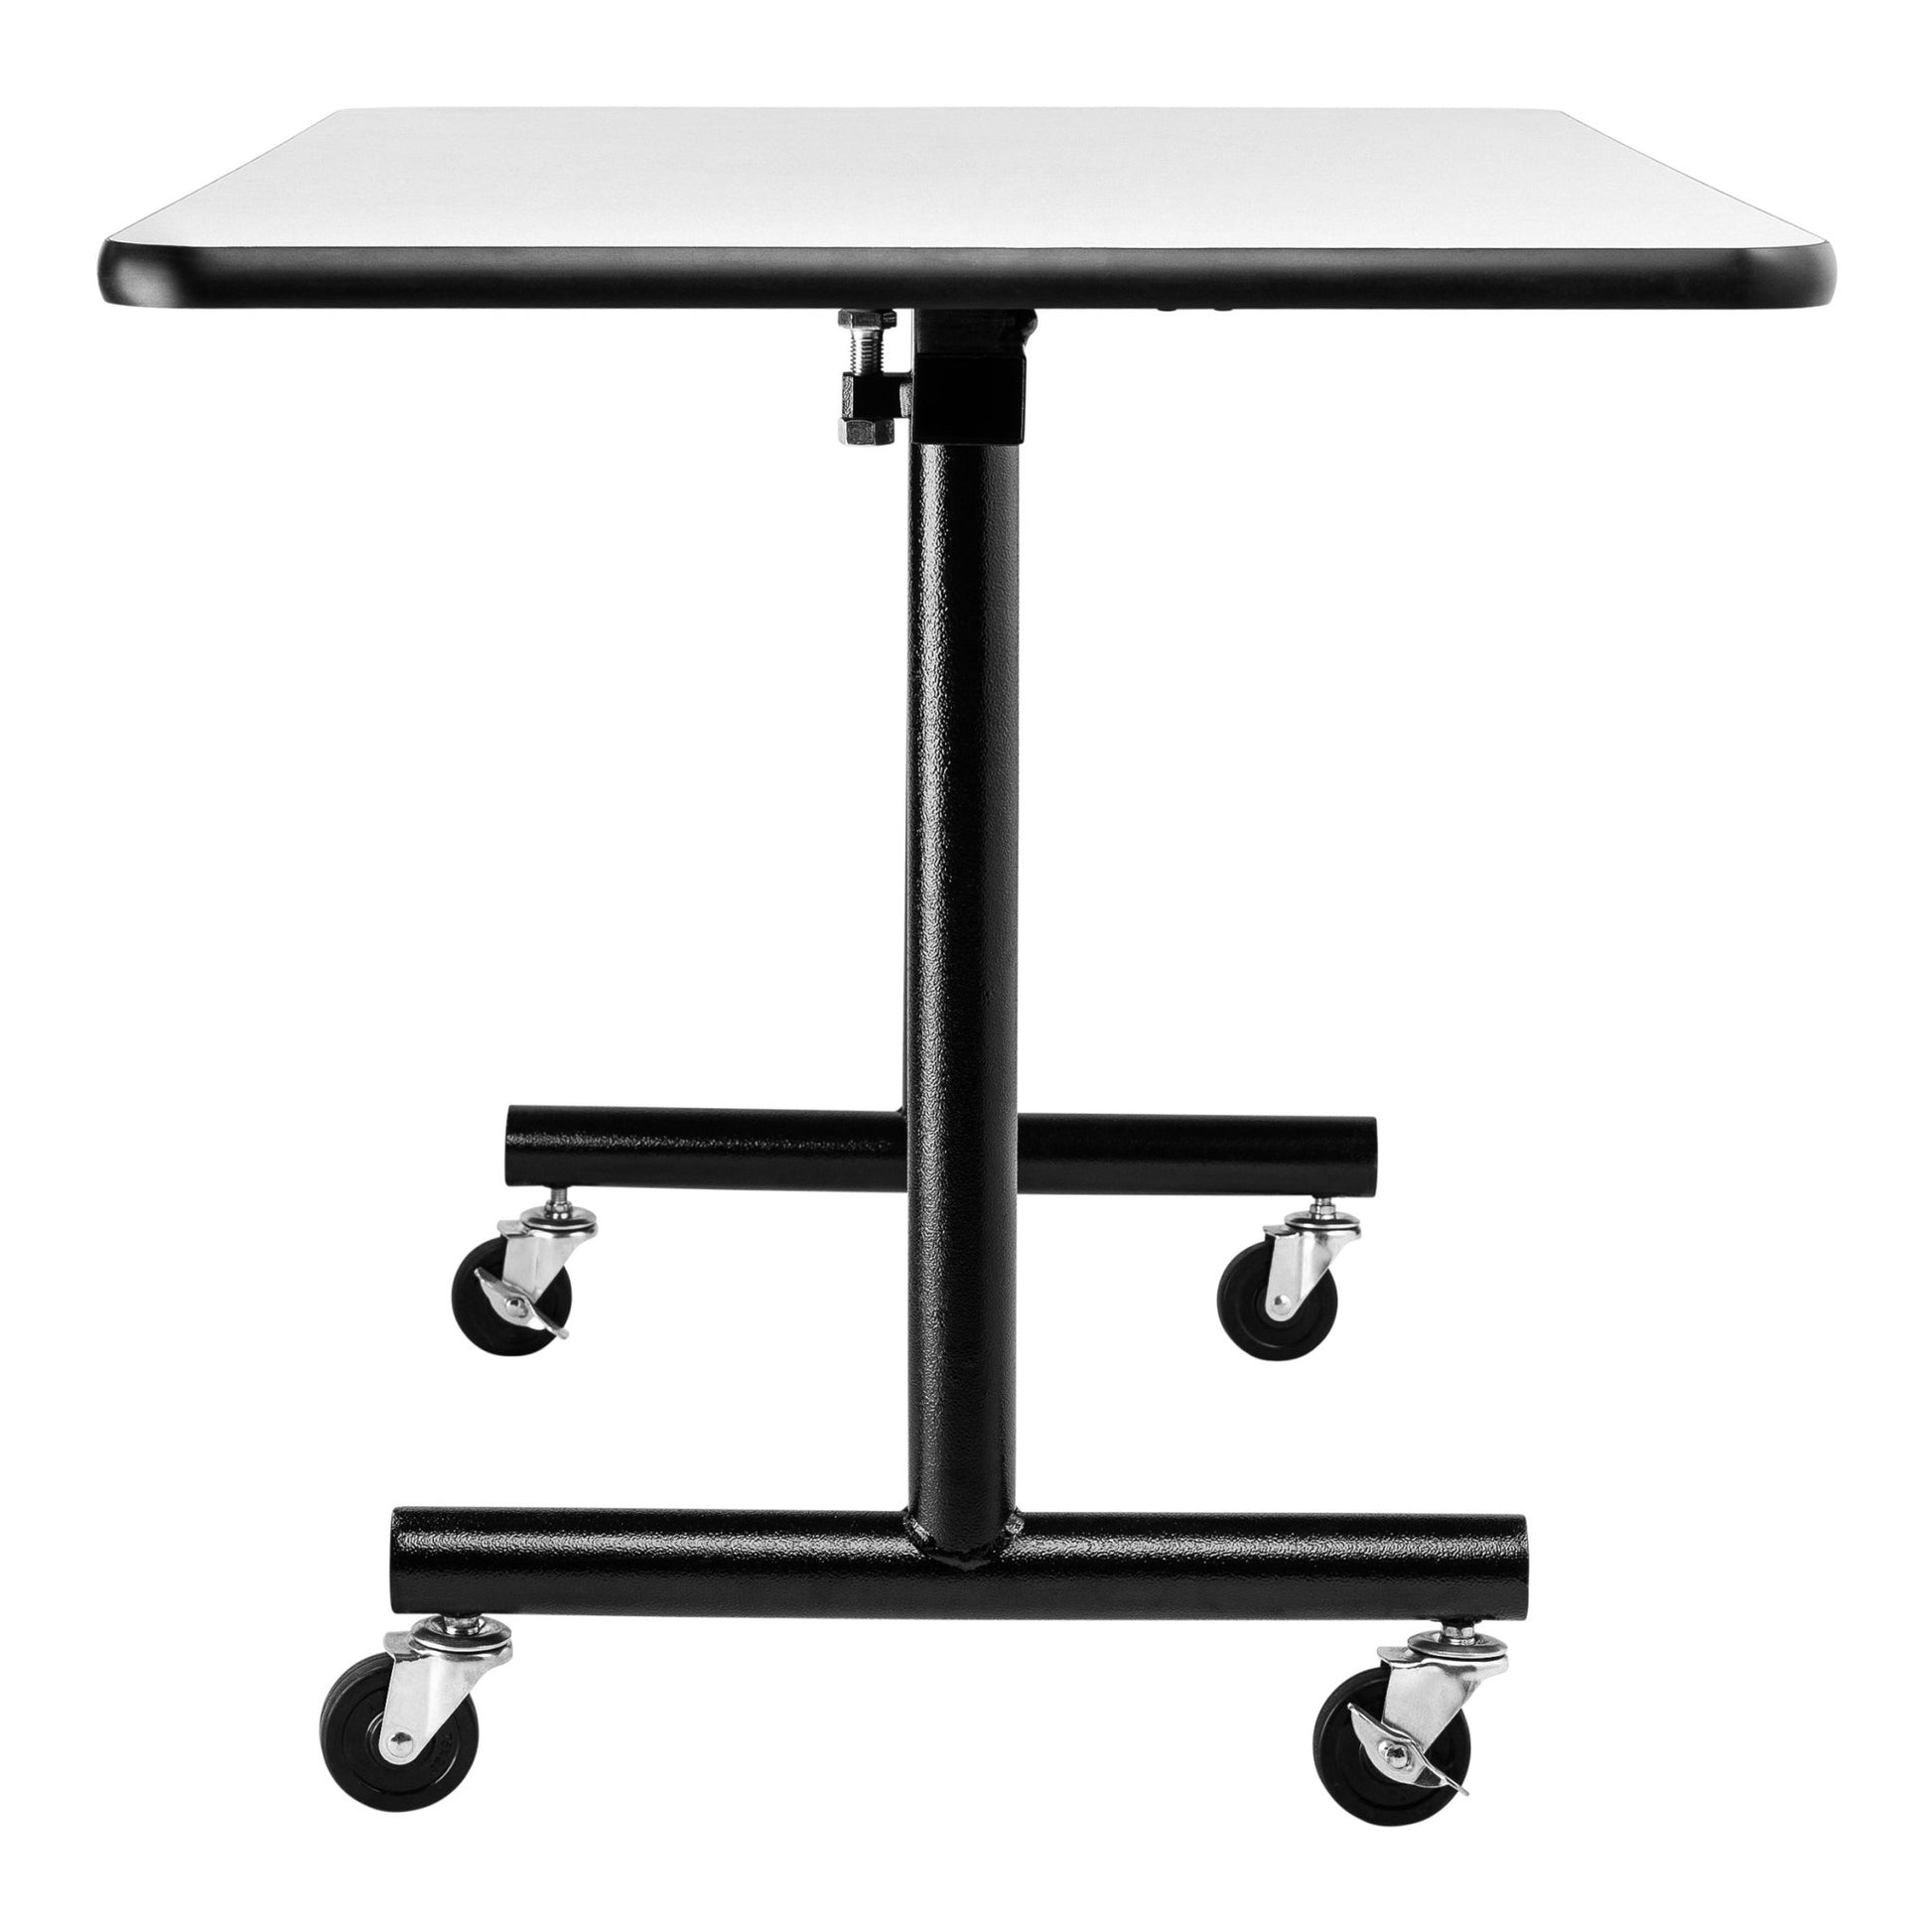 NPS ToGo Table, 24"x60", Particleboard Core (National Public Seating NPS-TGT2460PBTM) - SchoolOutlet